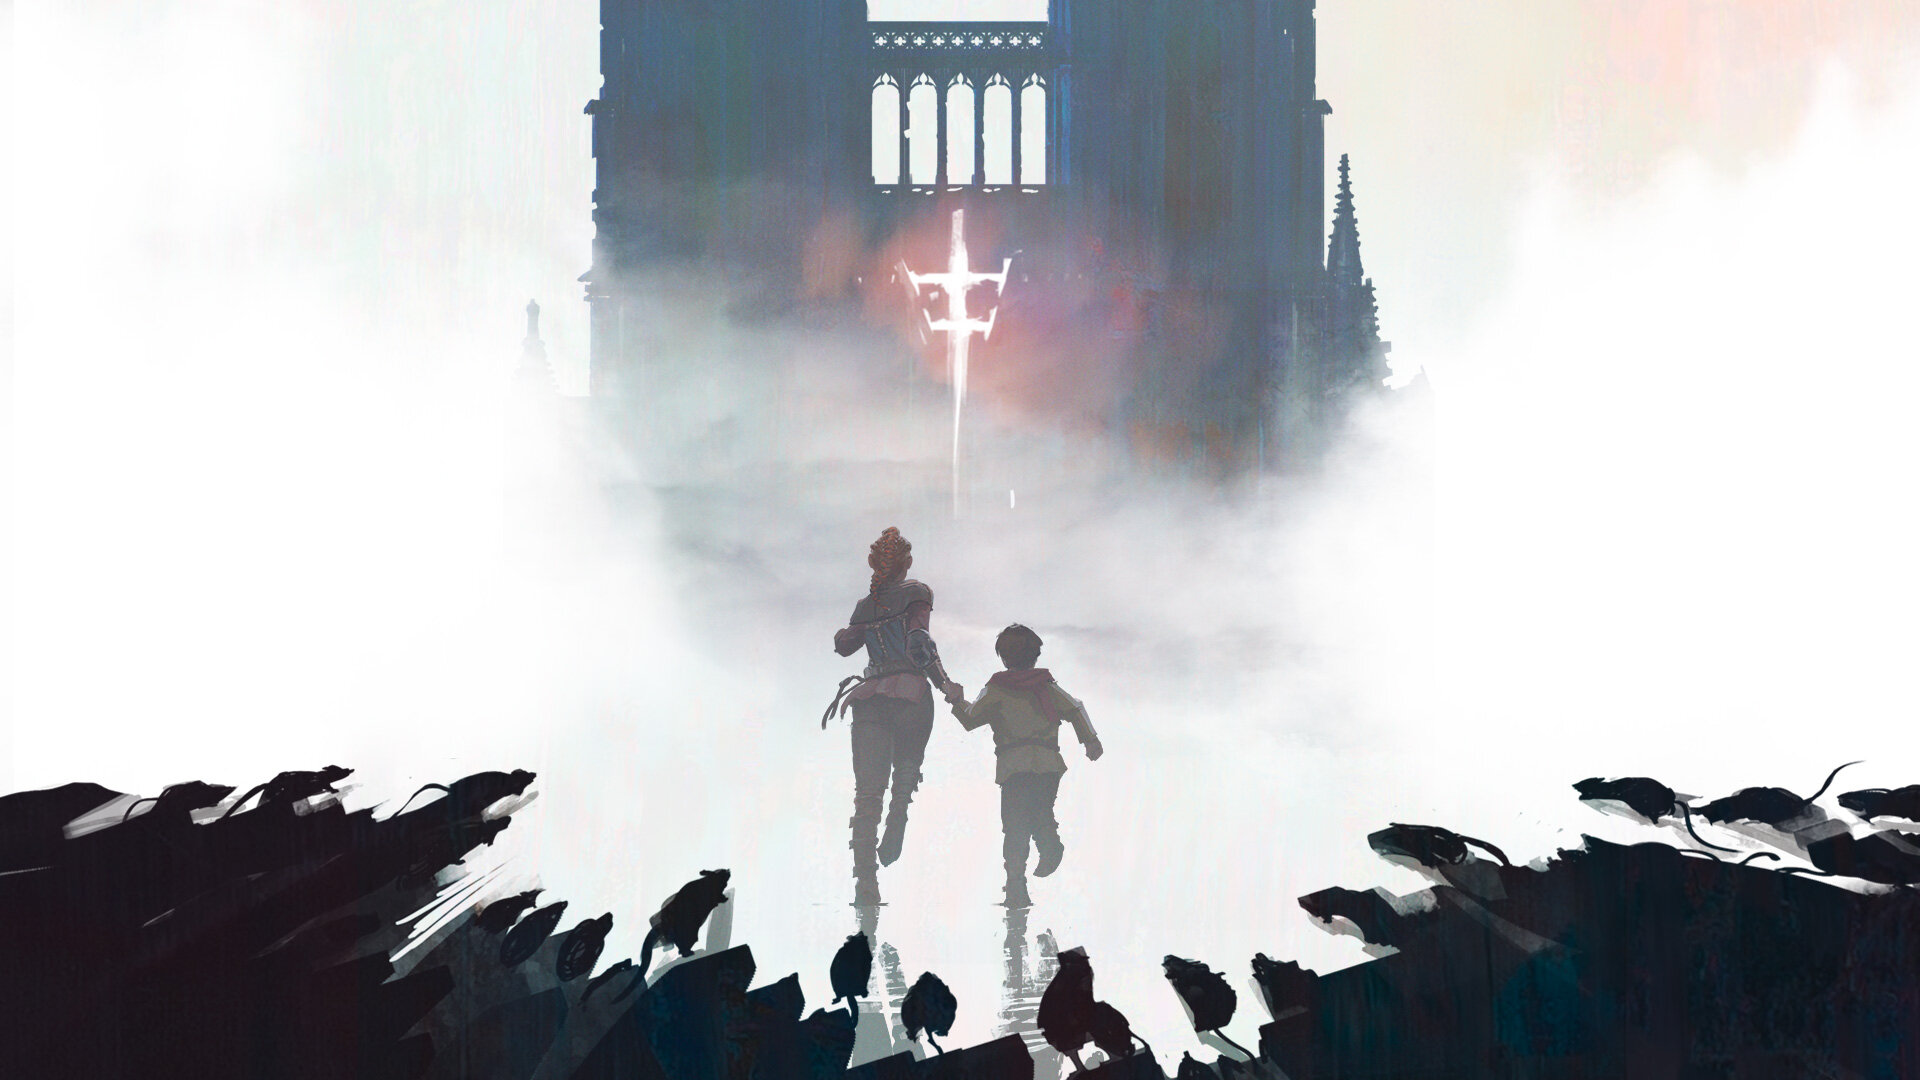 Review: 'A Plague Tale' Is a Harrowing Must-Play